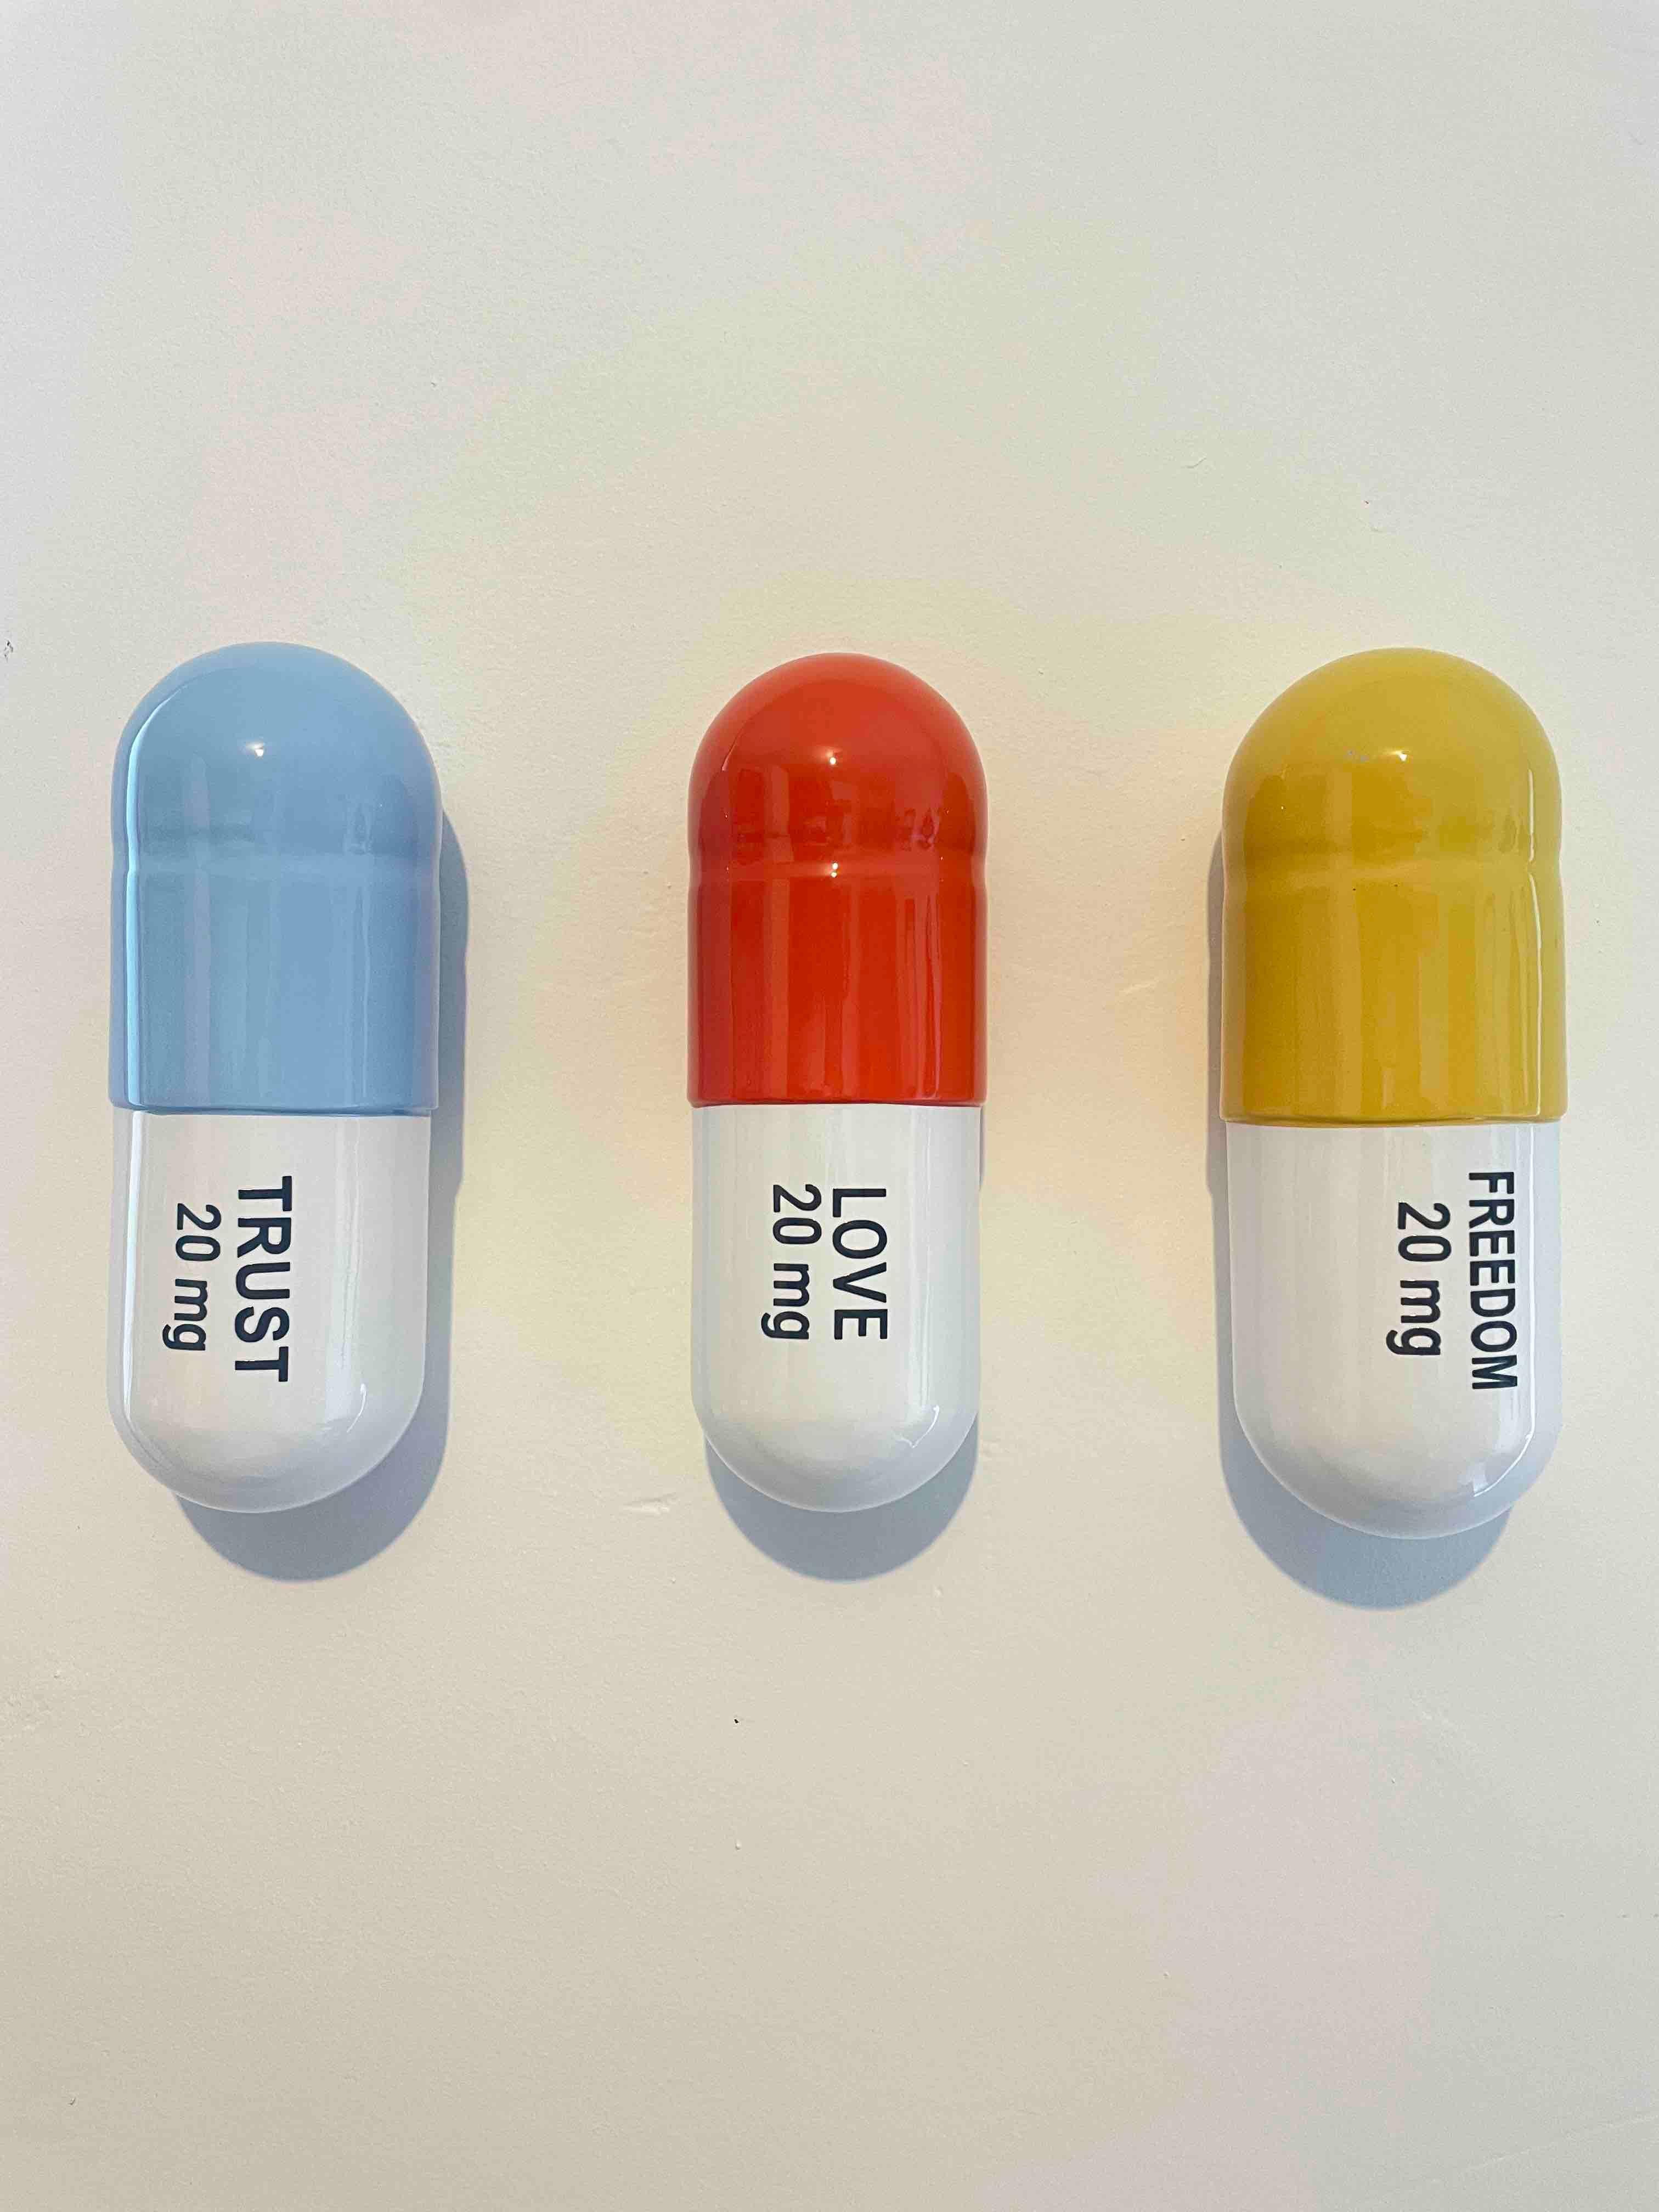 20 MG Trust, Love, Freedom pill Combo (turquoise, orange, yellow) - Sculpture by Tal Nehoray